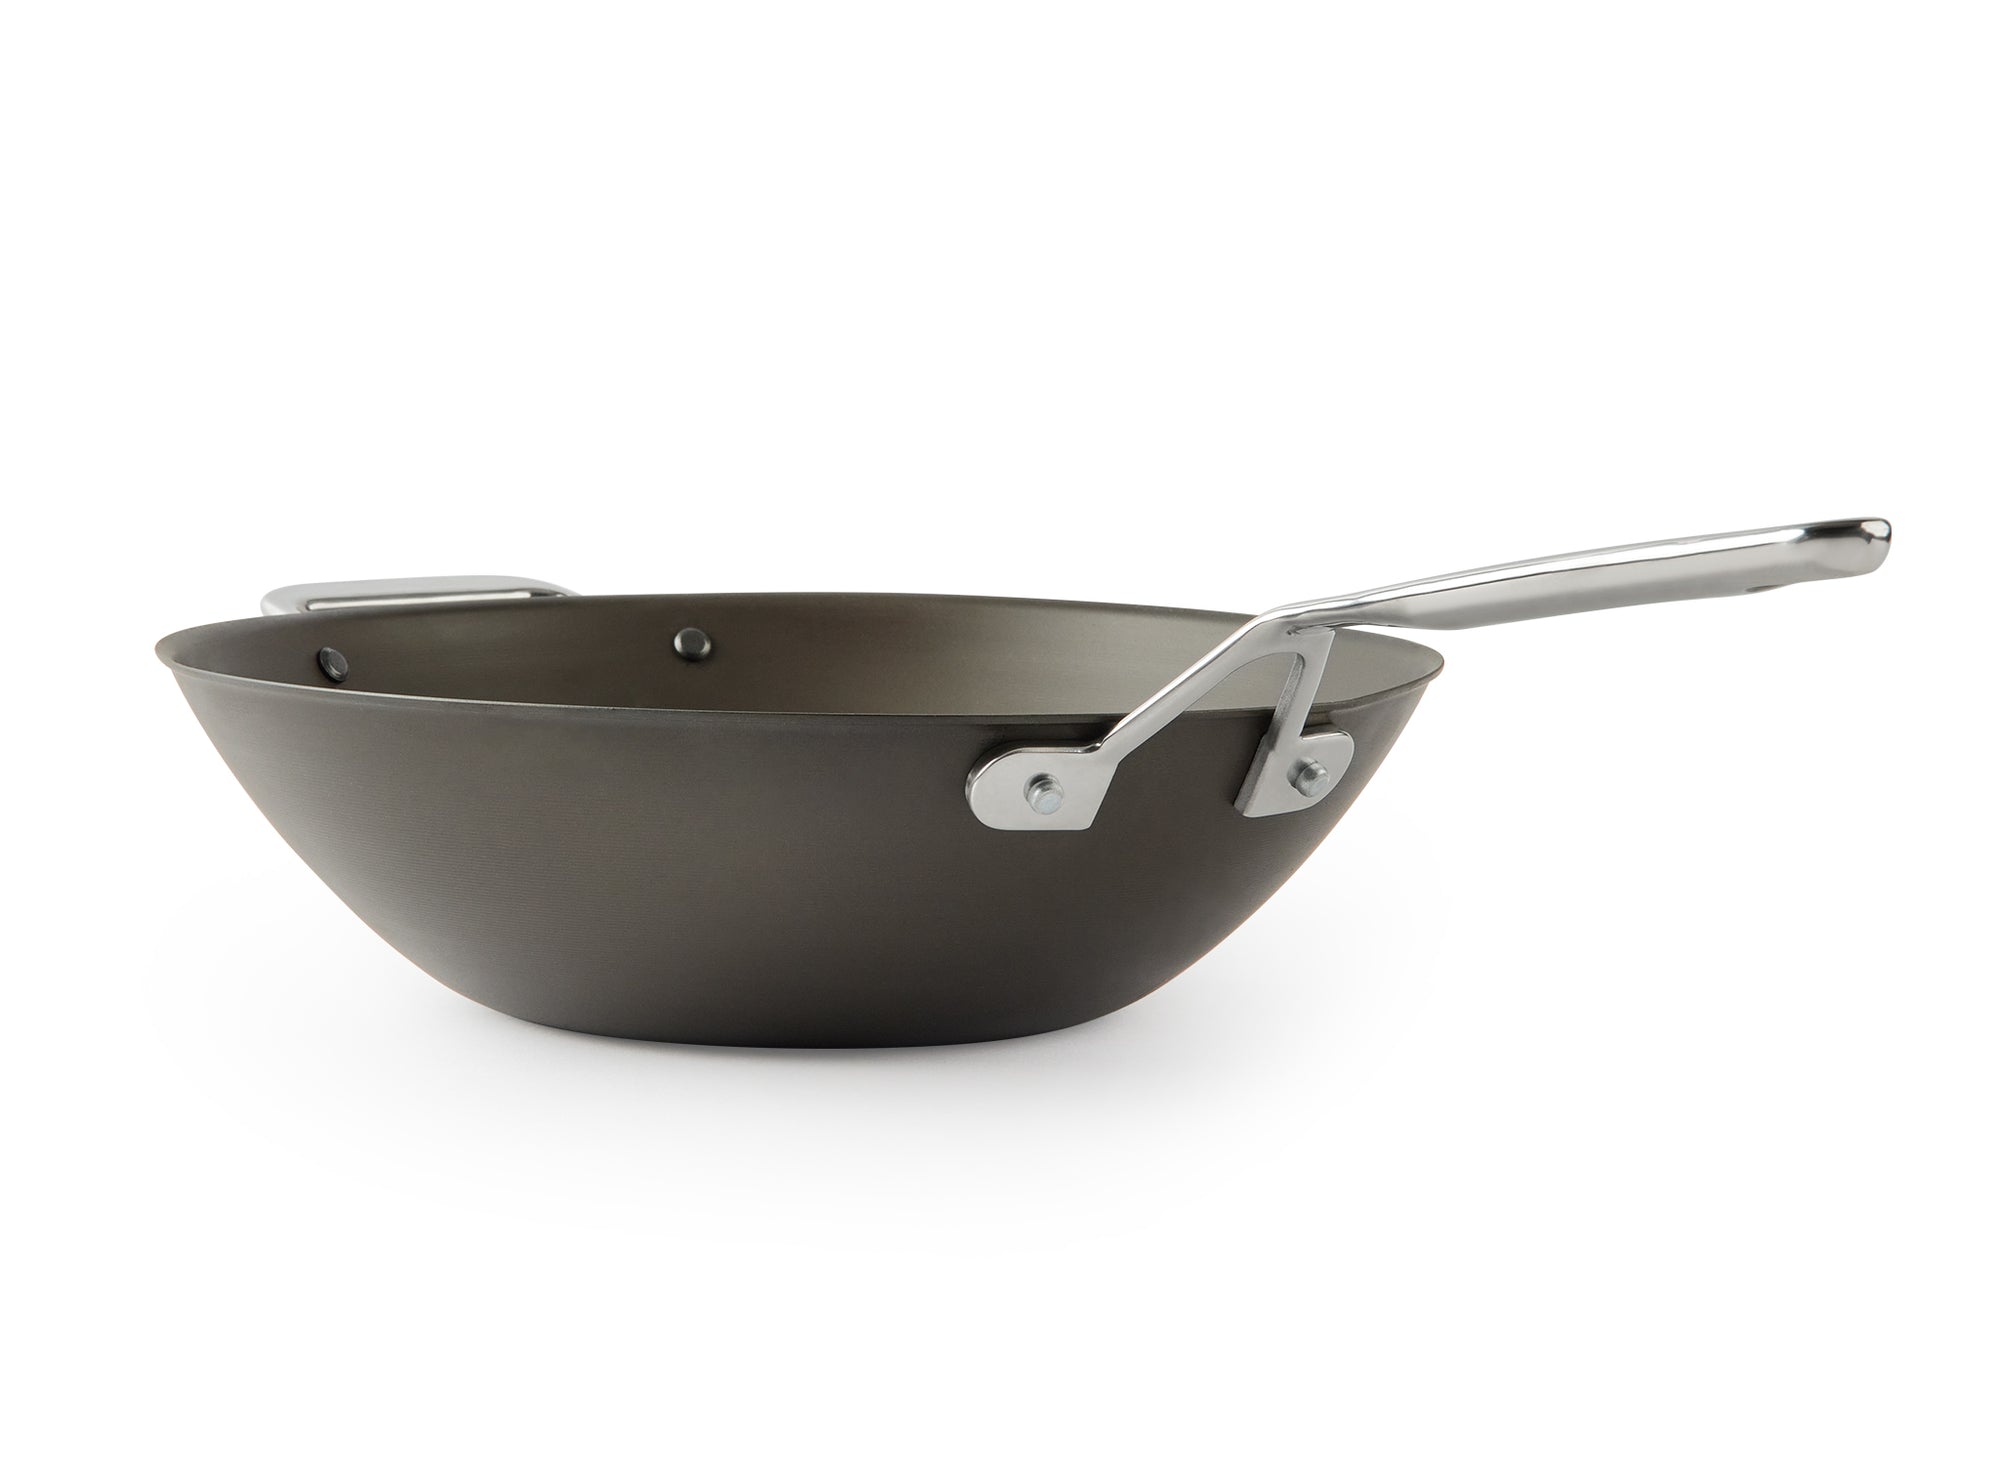 {{12-inch}} A side angle view of the Misen Carbon Steel Wok on a white background.